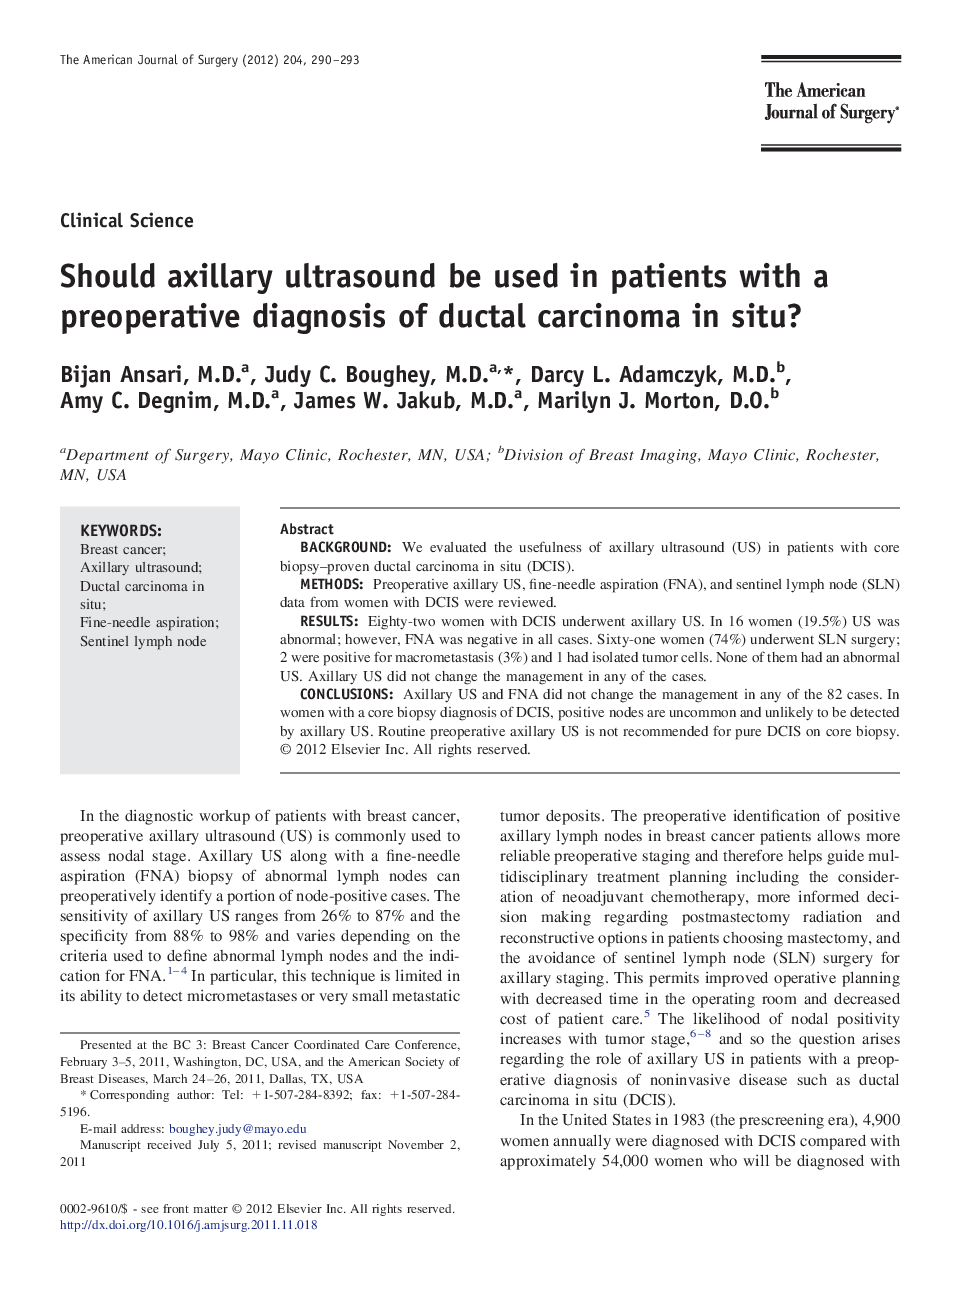 Should axillary ultrasound be used in patients with a preoperative diagnosis of ductal carcinoma in situ?